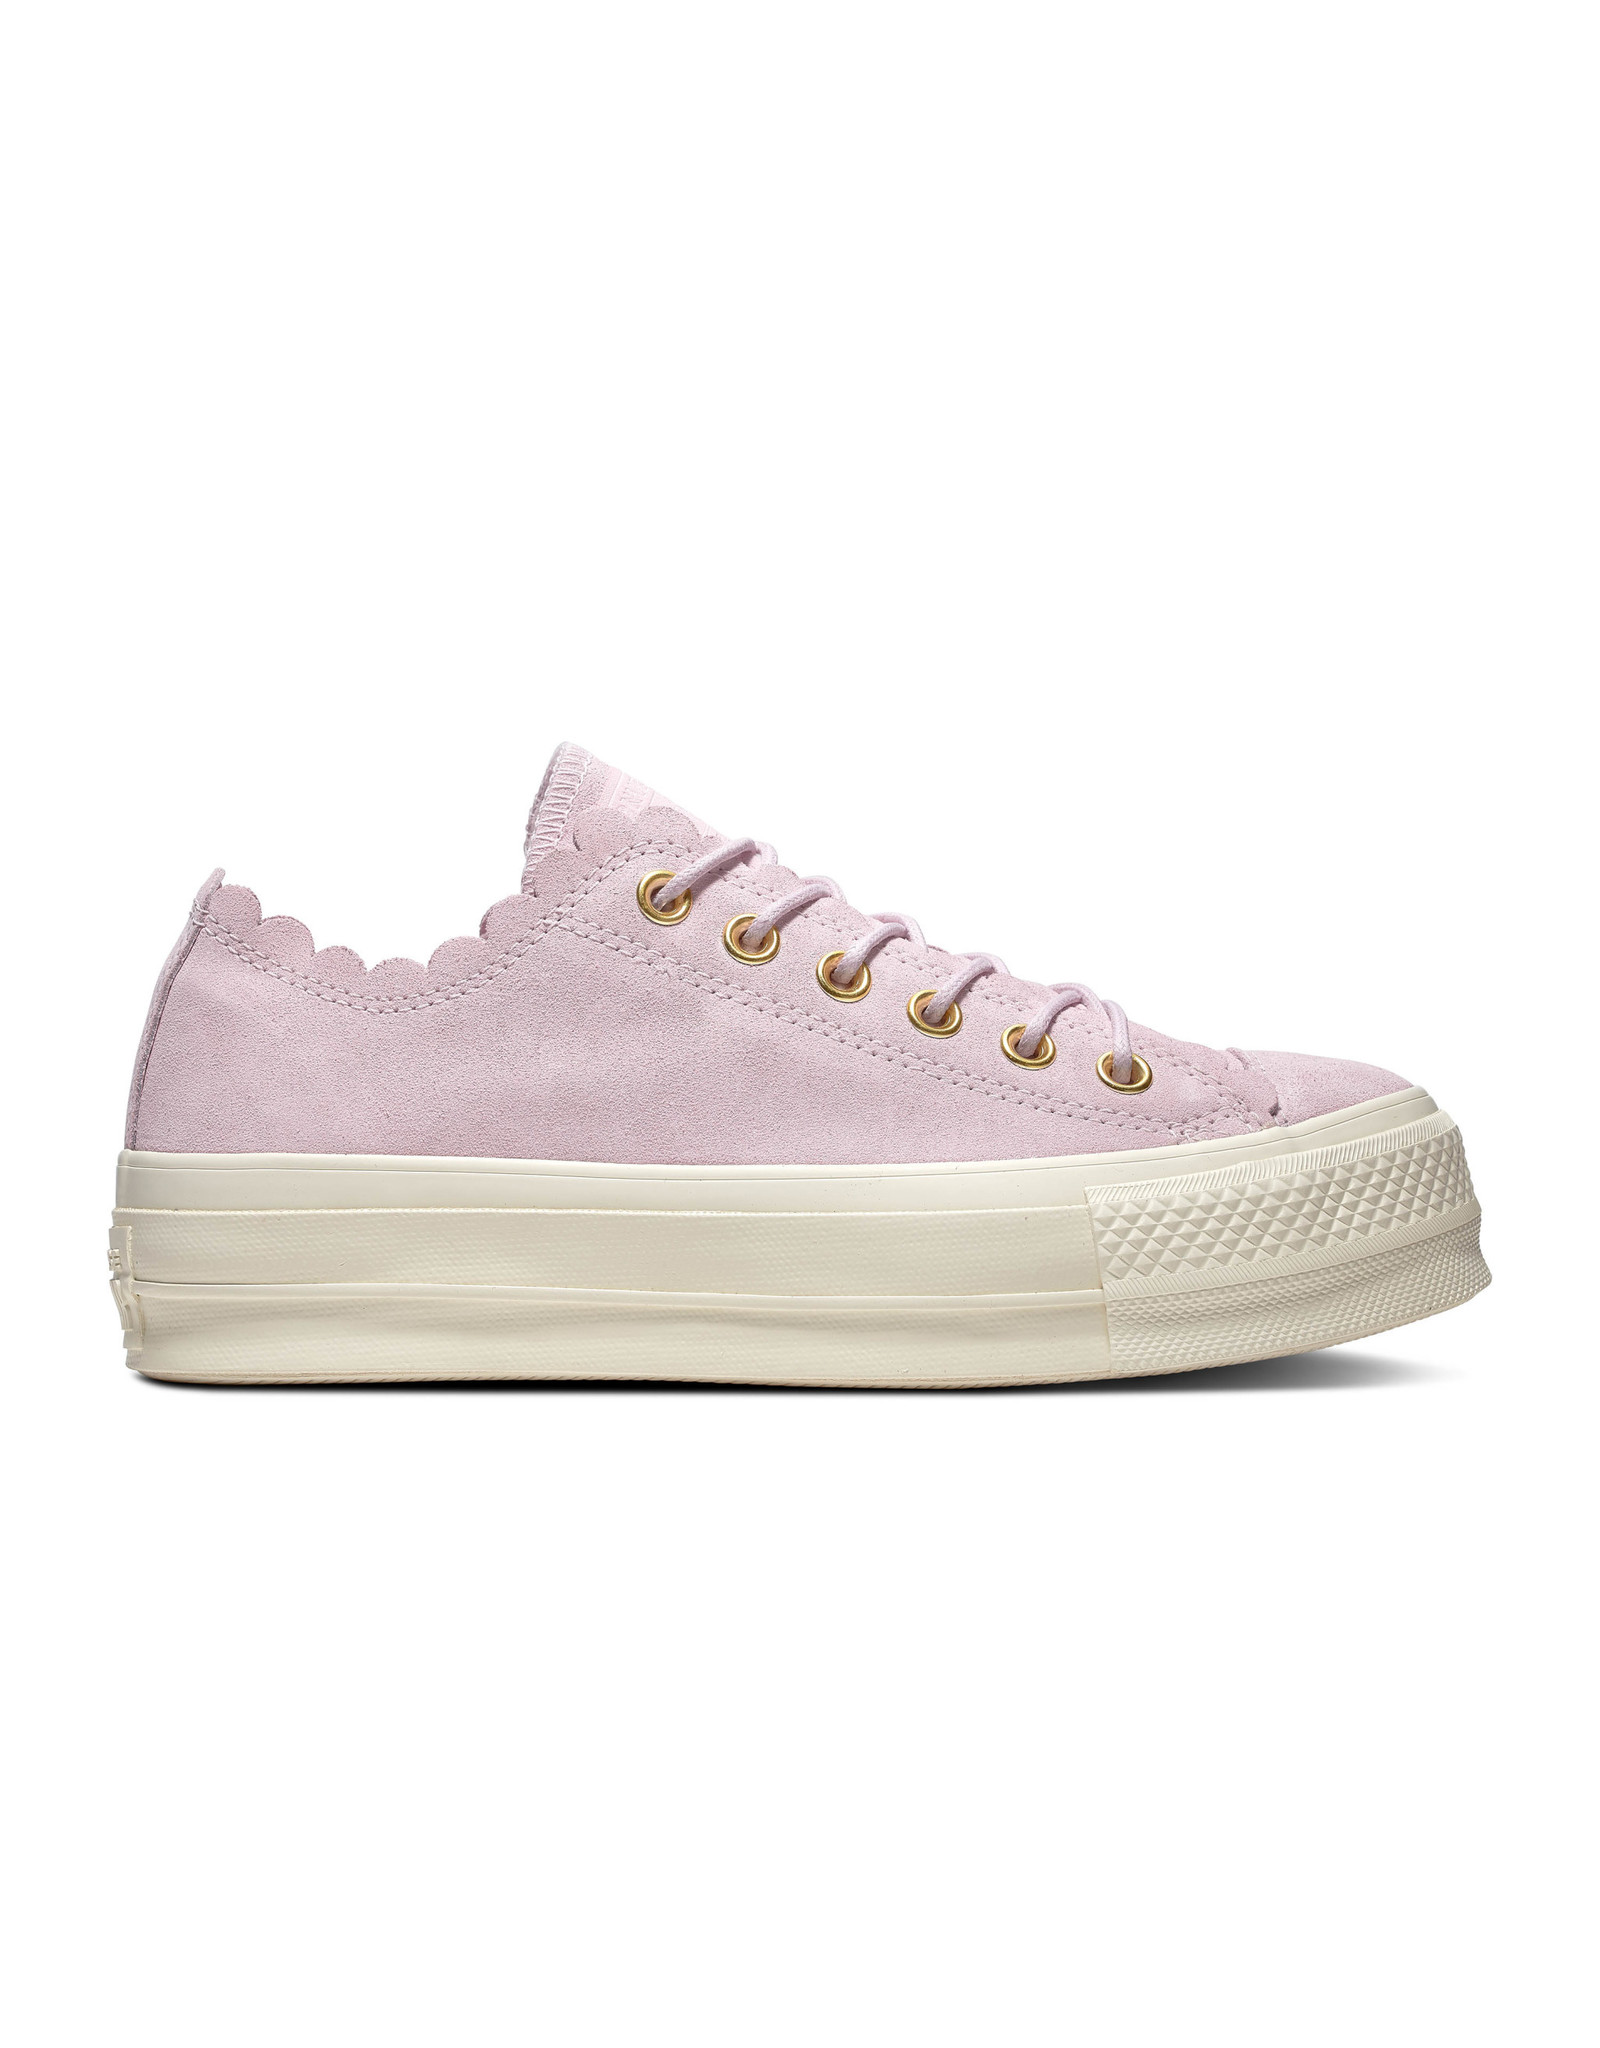 CHUCK TAYLOR ALL STAR LIFT OX SUEDE PINK FOAM/GOLD/EGRET C13PPF-563500C